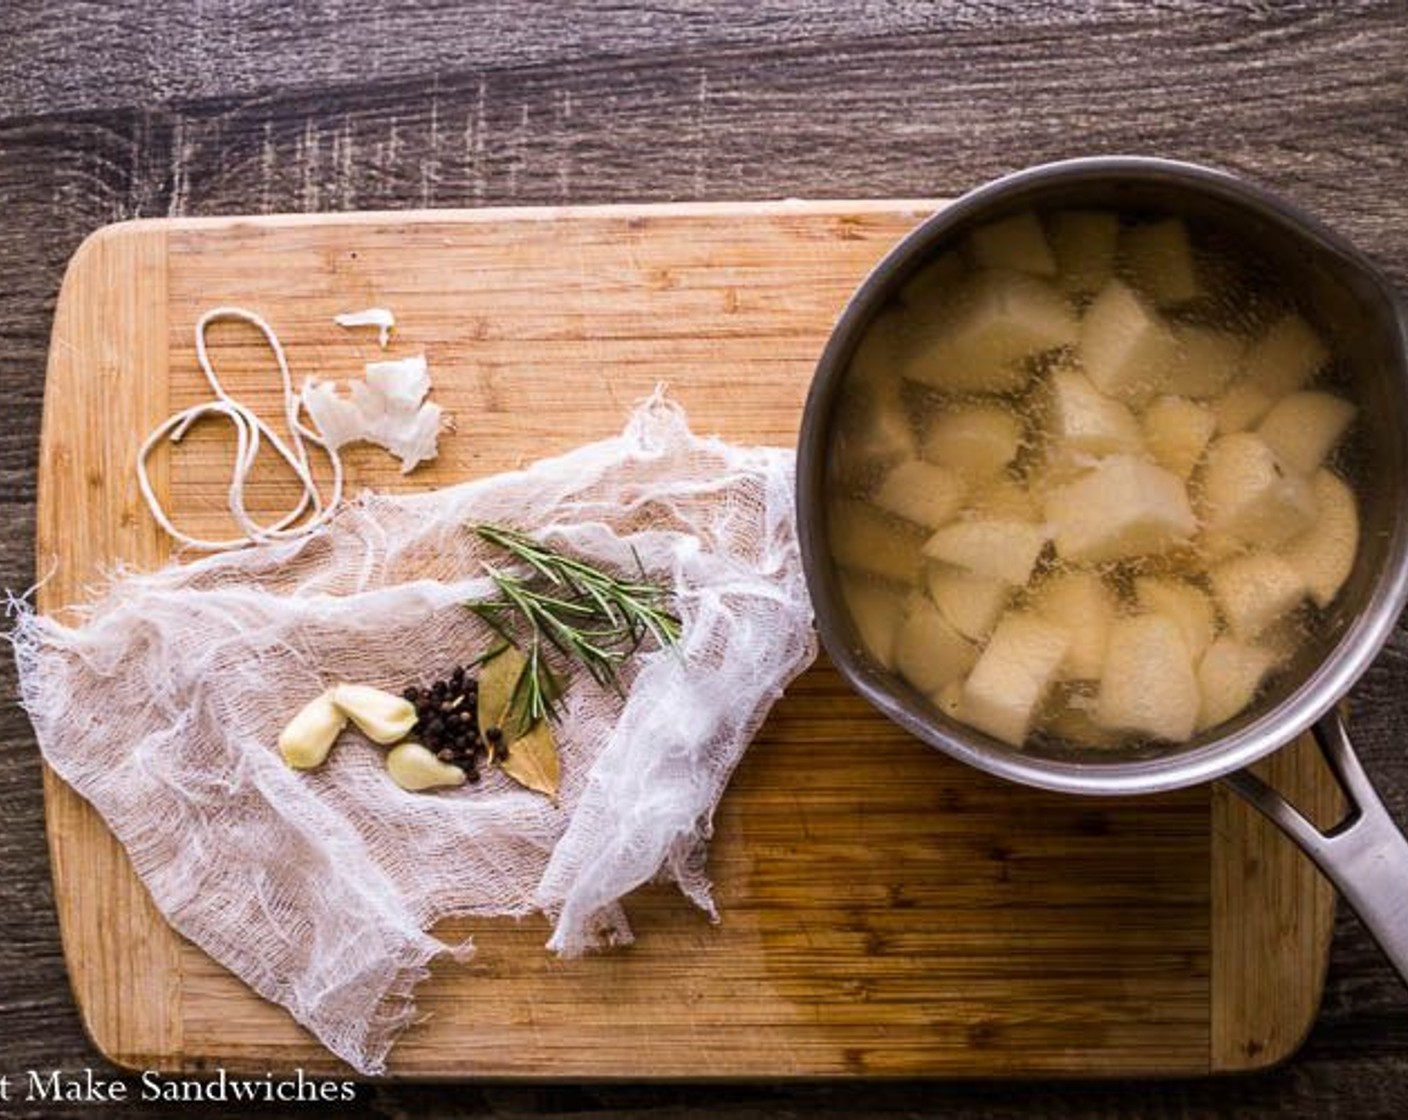 step 2 Cook until potatoes are fork tender, about 35-40 minutes. Drain from water, once potatoes are done, and discard sachet.